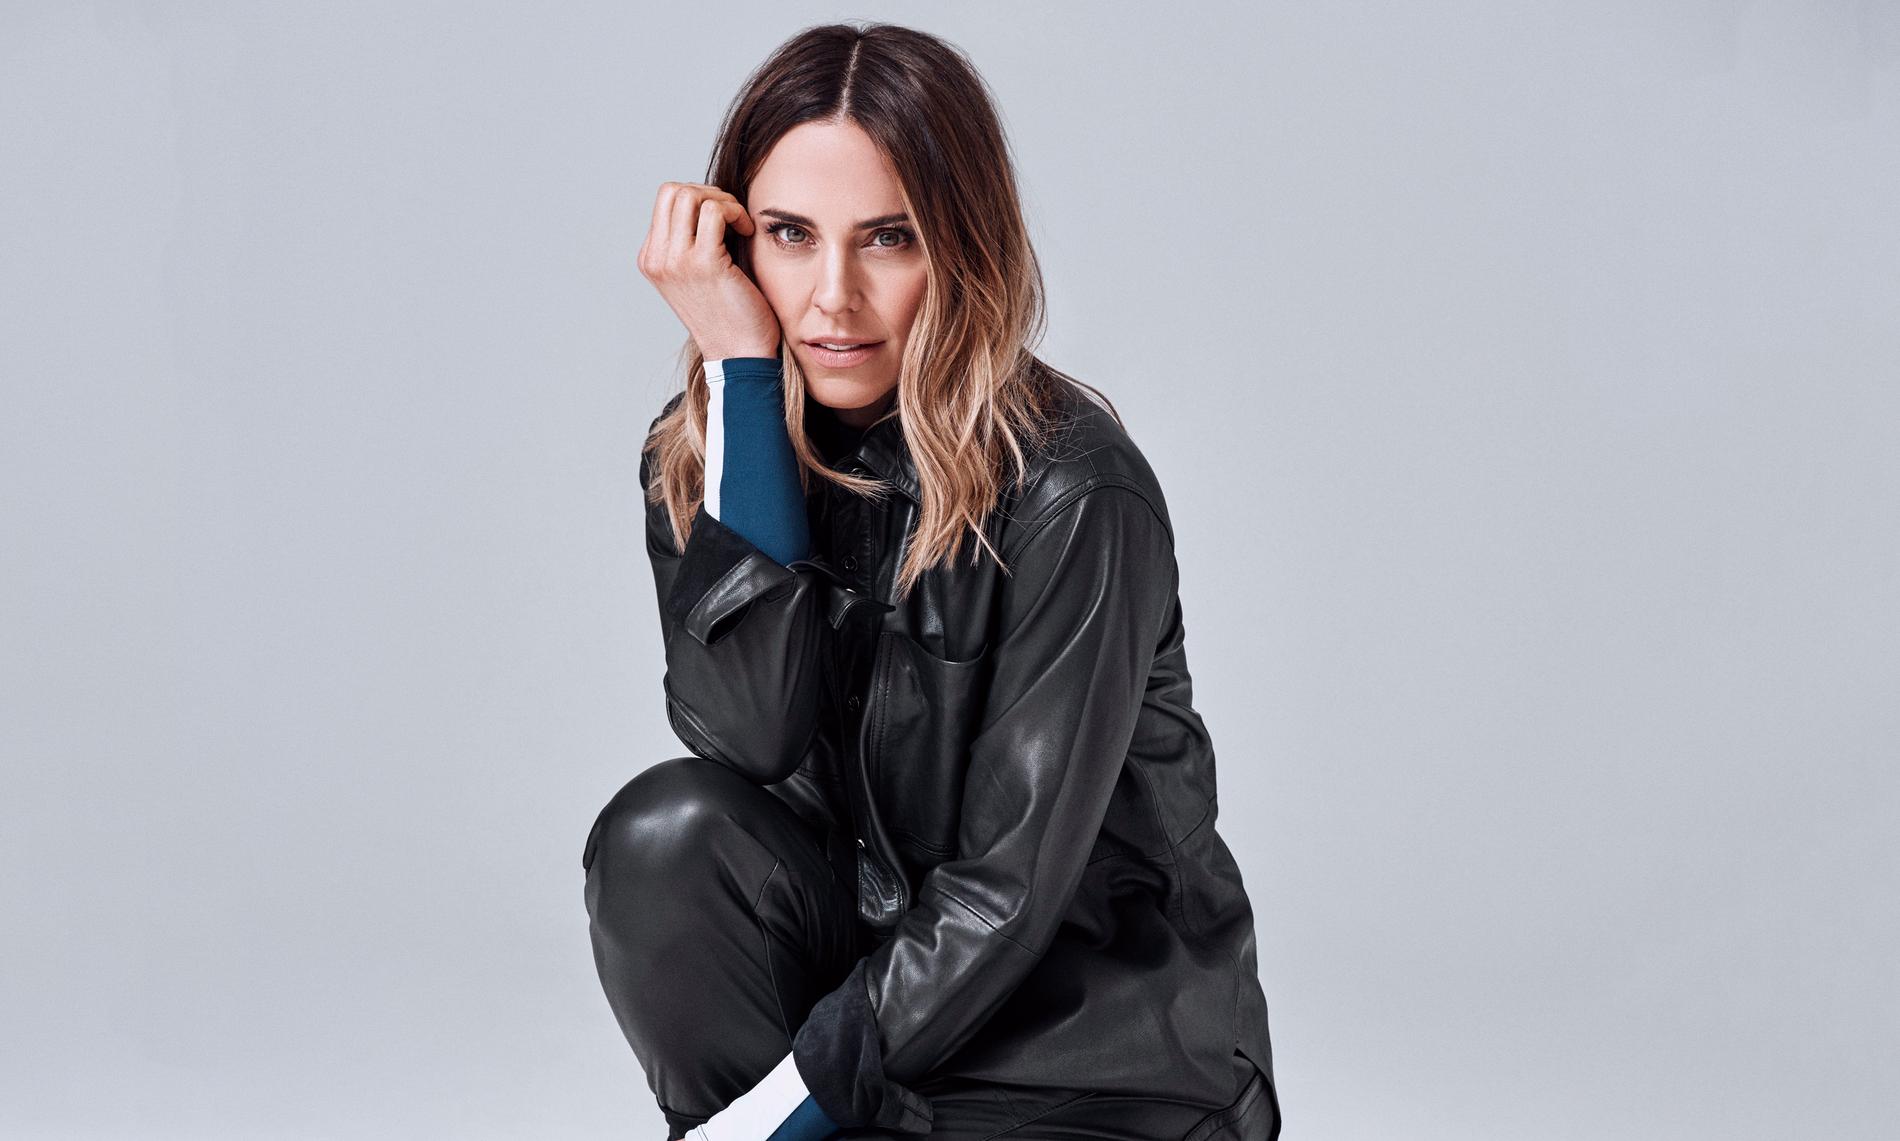 Spice Girls’ Mel C is coming to Norway – VG